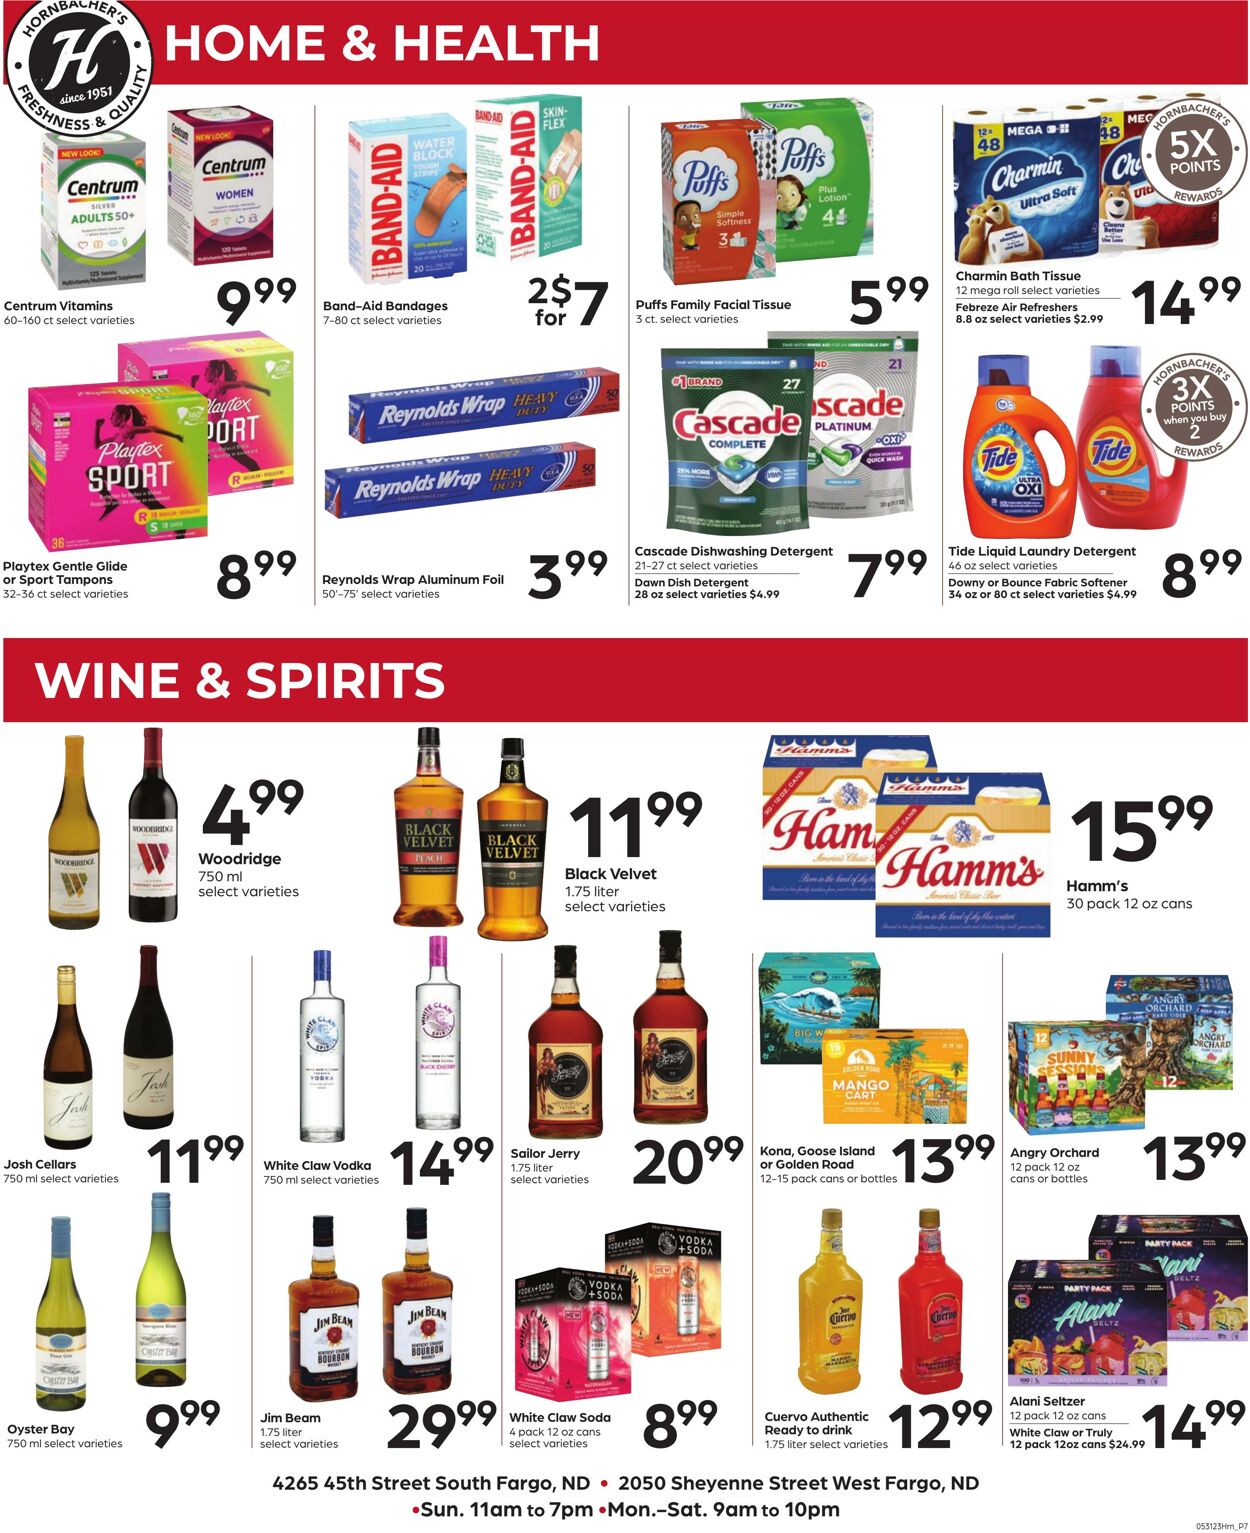 Hornbacher's Promotional weekly ads